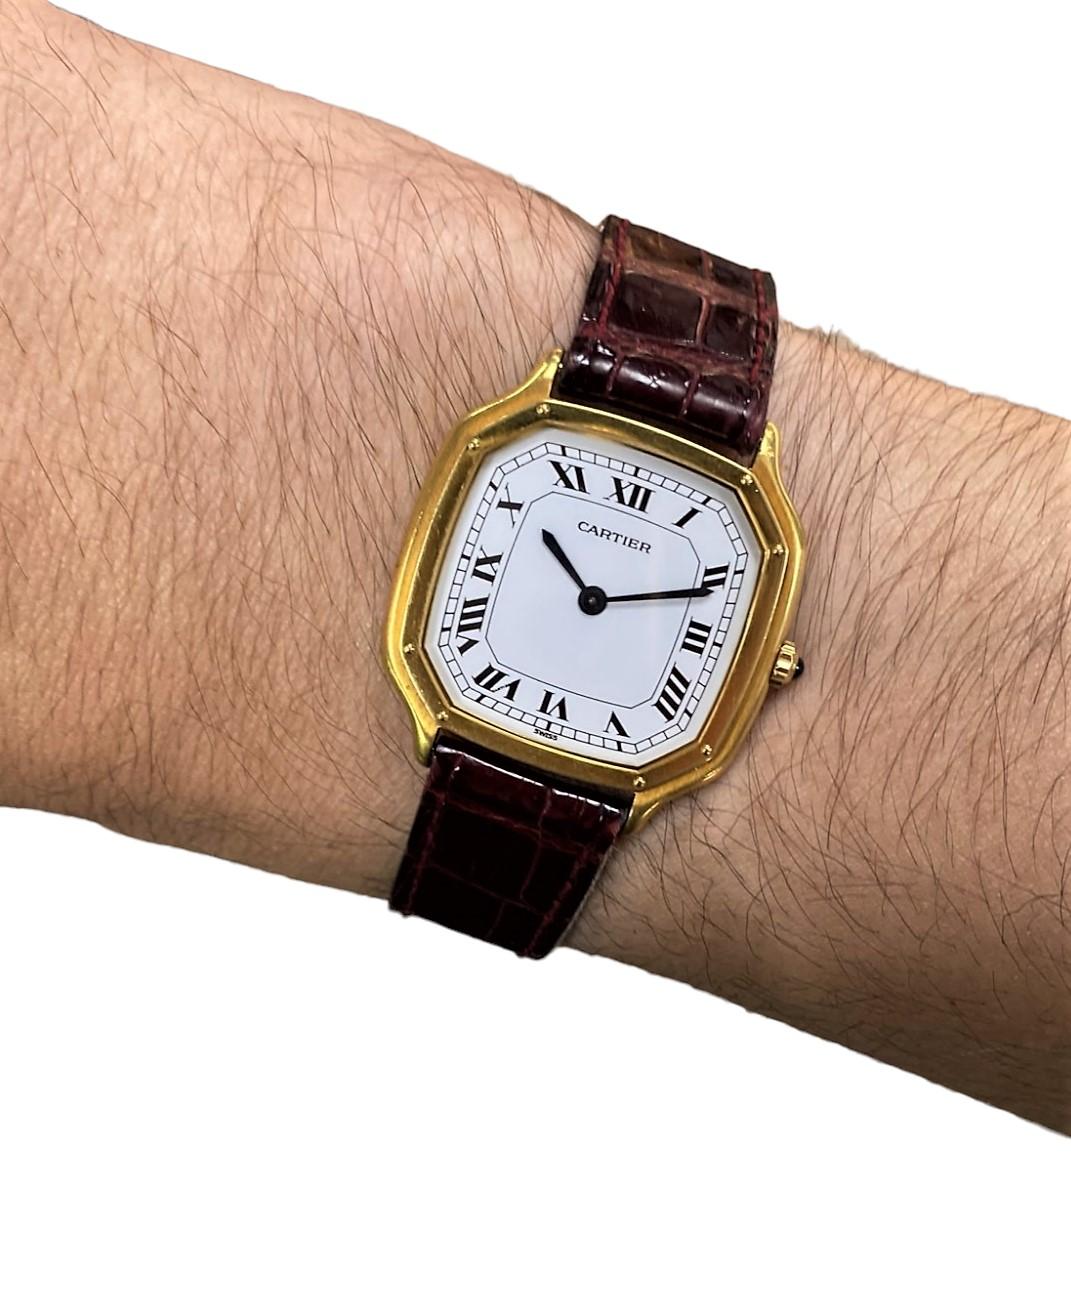 Vintage Cartier Trianon Santos extra thin (extra plate), fitted with an 17-jewel Frederick Piguet movement  caliber 096. The watch was made in the late 1970's Circa 1978. The watch is made in 18K yellow gold and measures 29 x 32 x 4mm thick. The